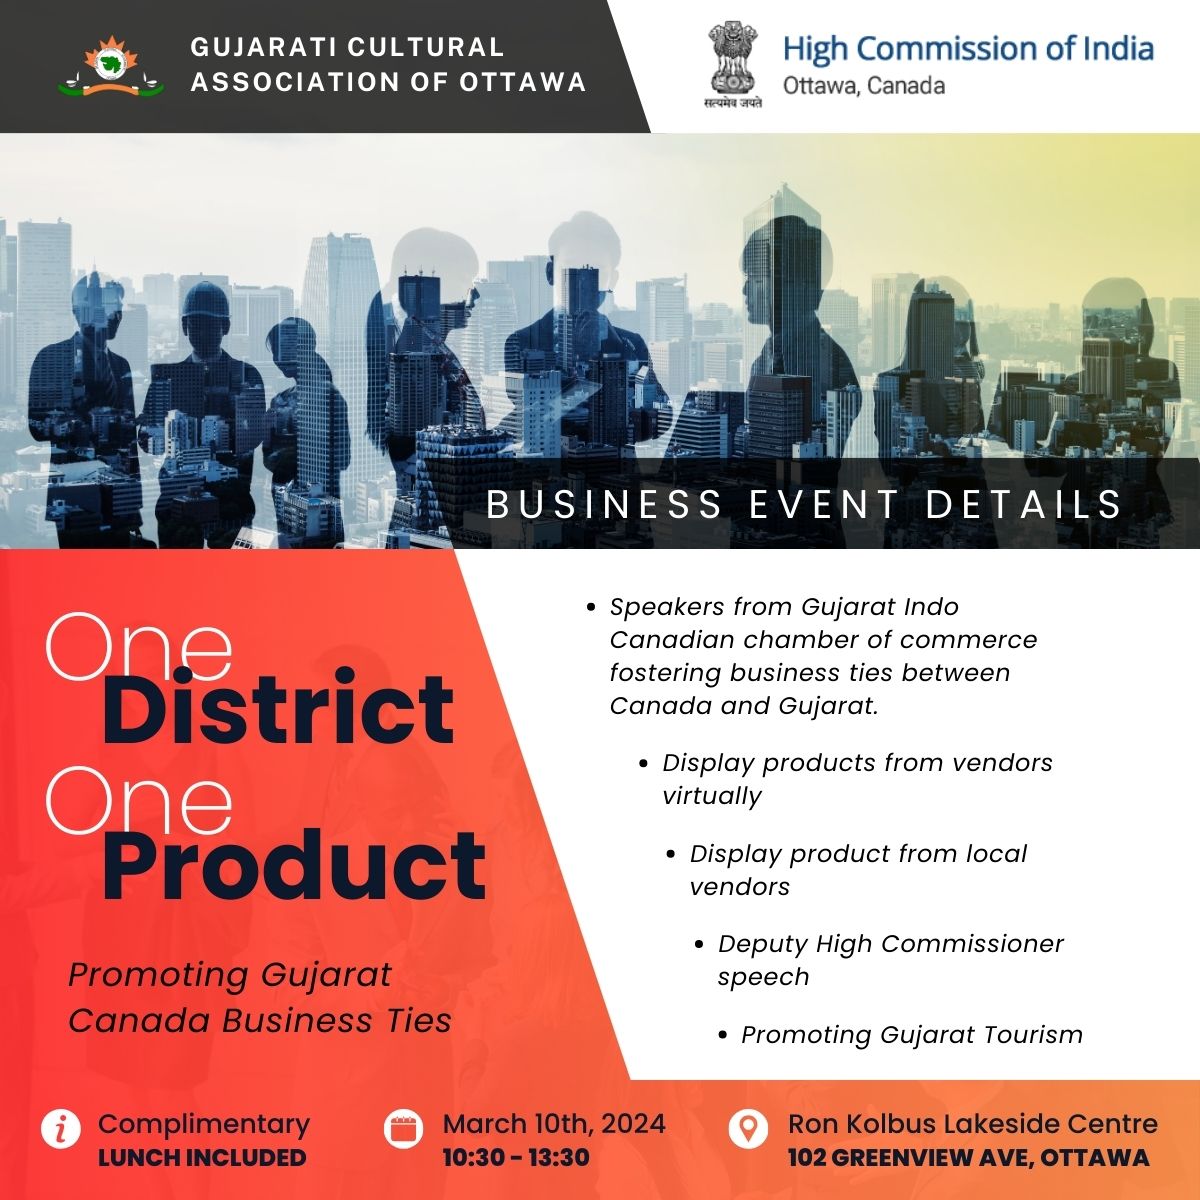 One District One Product Business Event